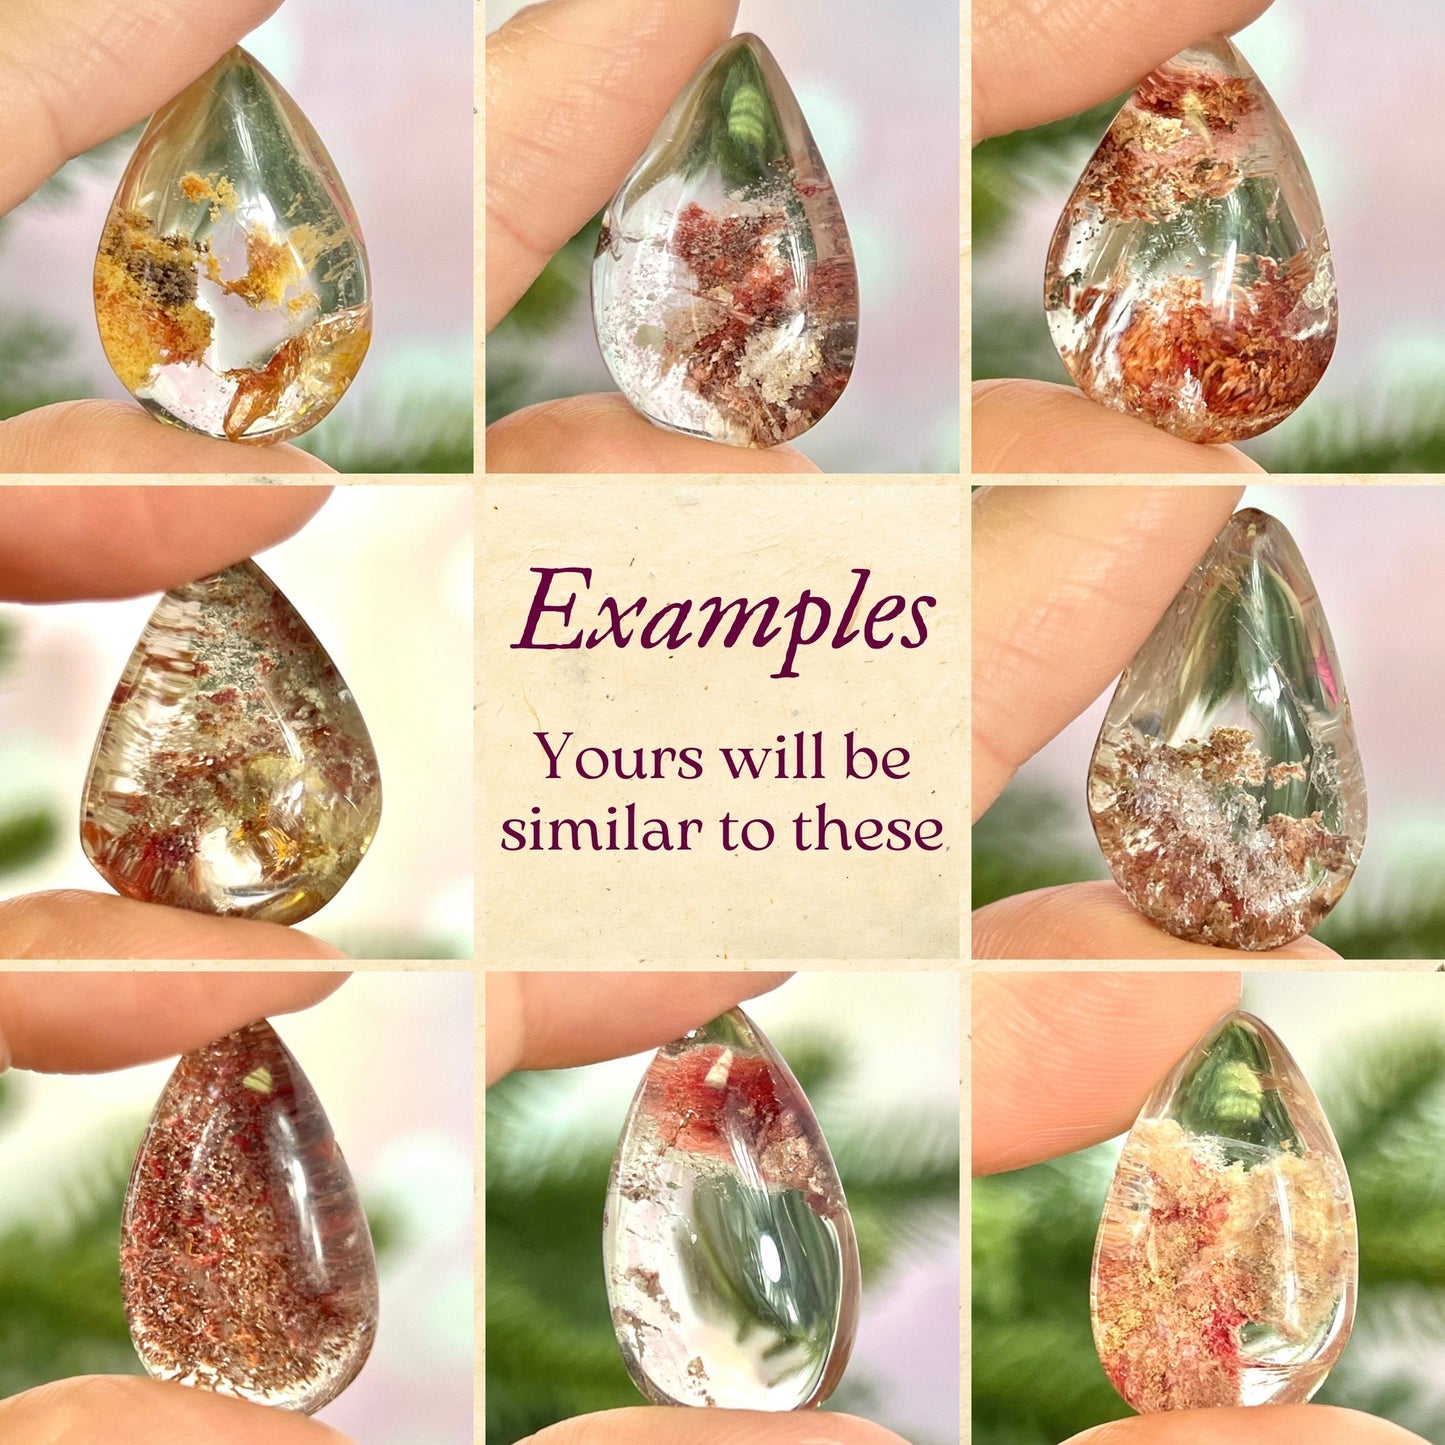 examples of tumbled crystals in a teardrop shape. They are lodolite Garden Quartz with dyed red inclusions